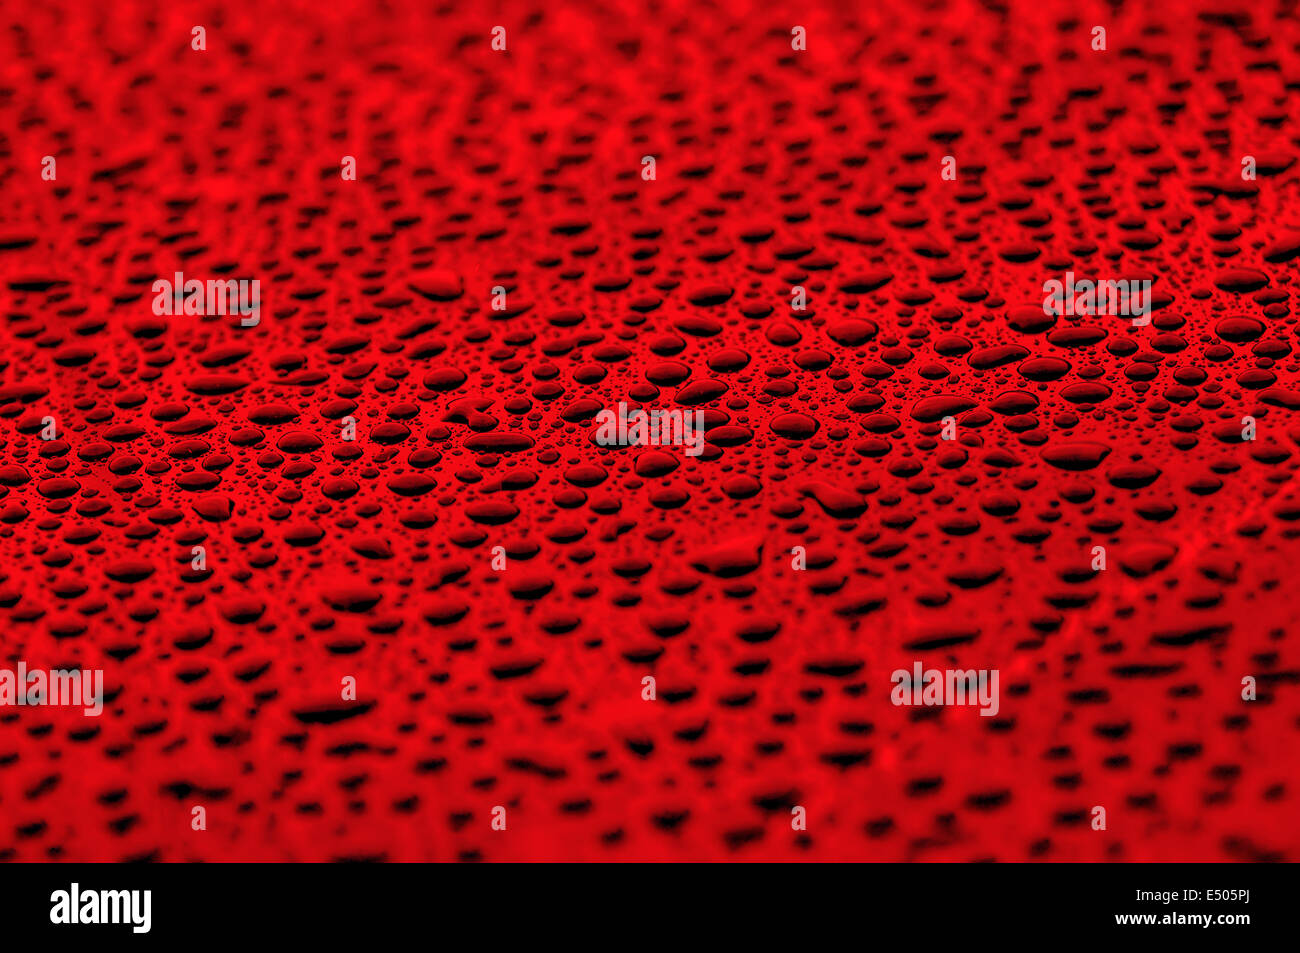 red water drops on water-repellent surface Stock Photo